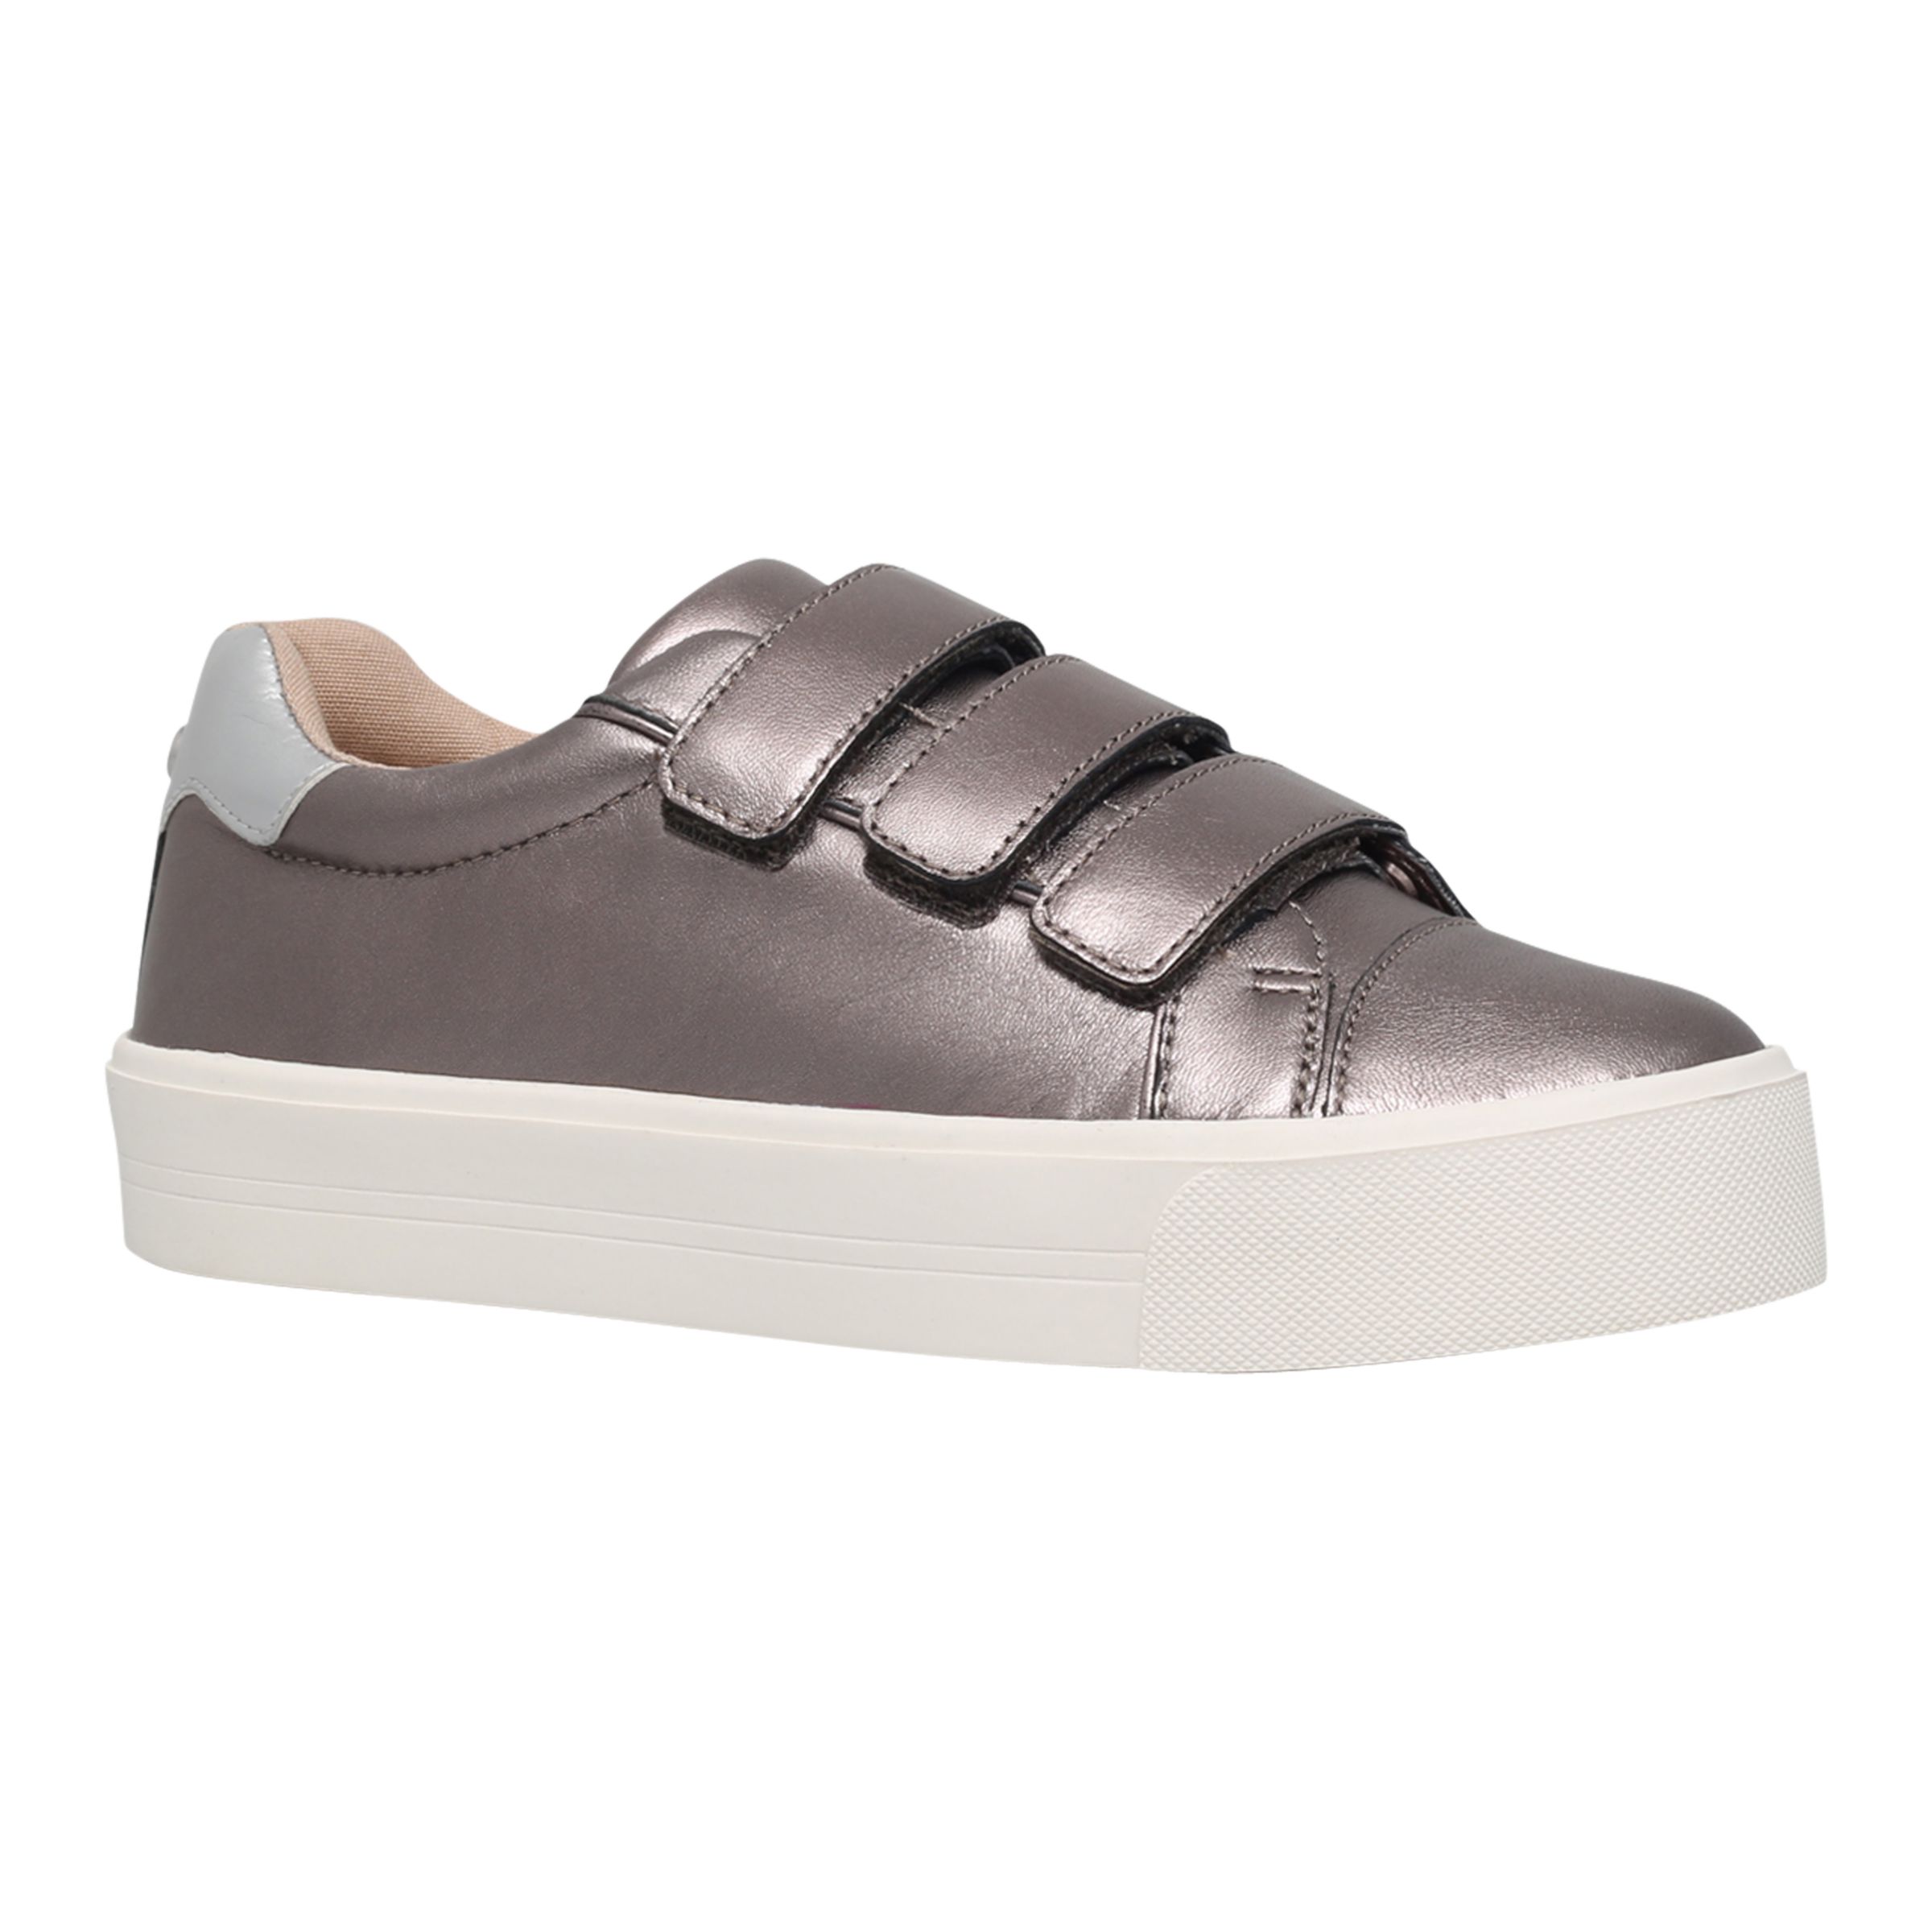 Carvela Lily Leather Sports Shoes, Pewter, 7